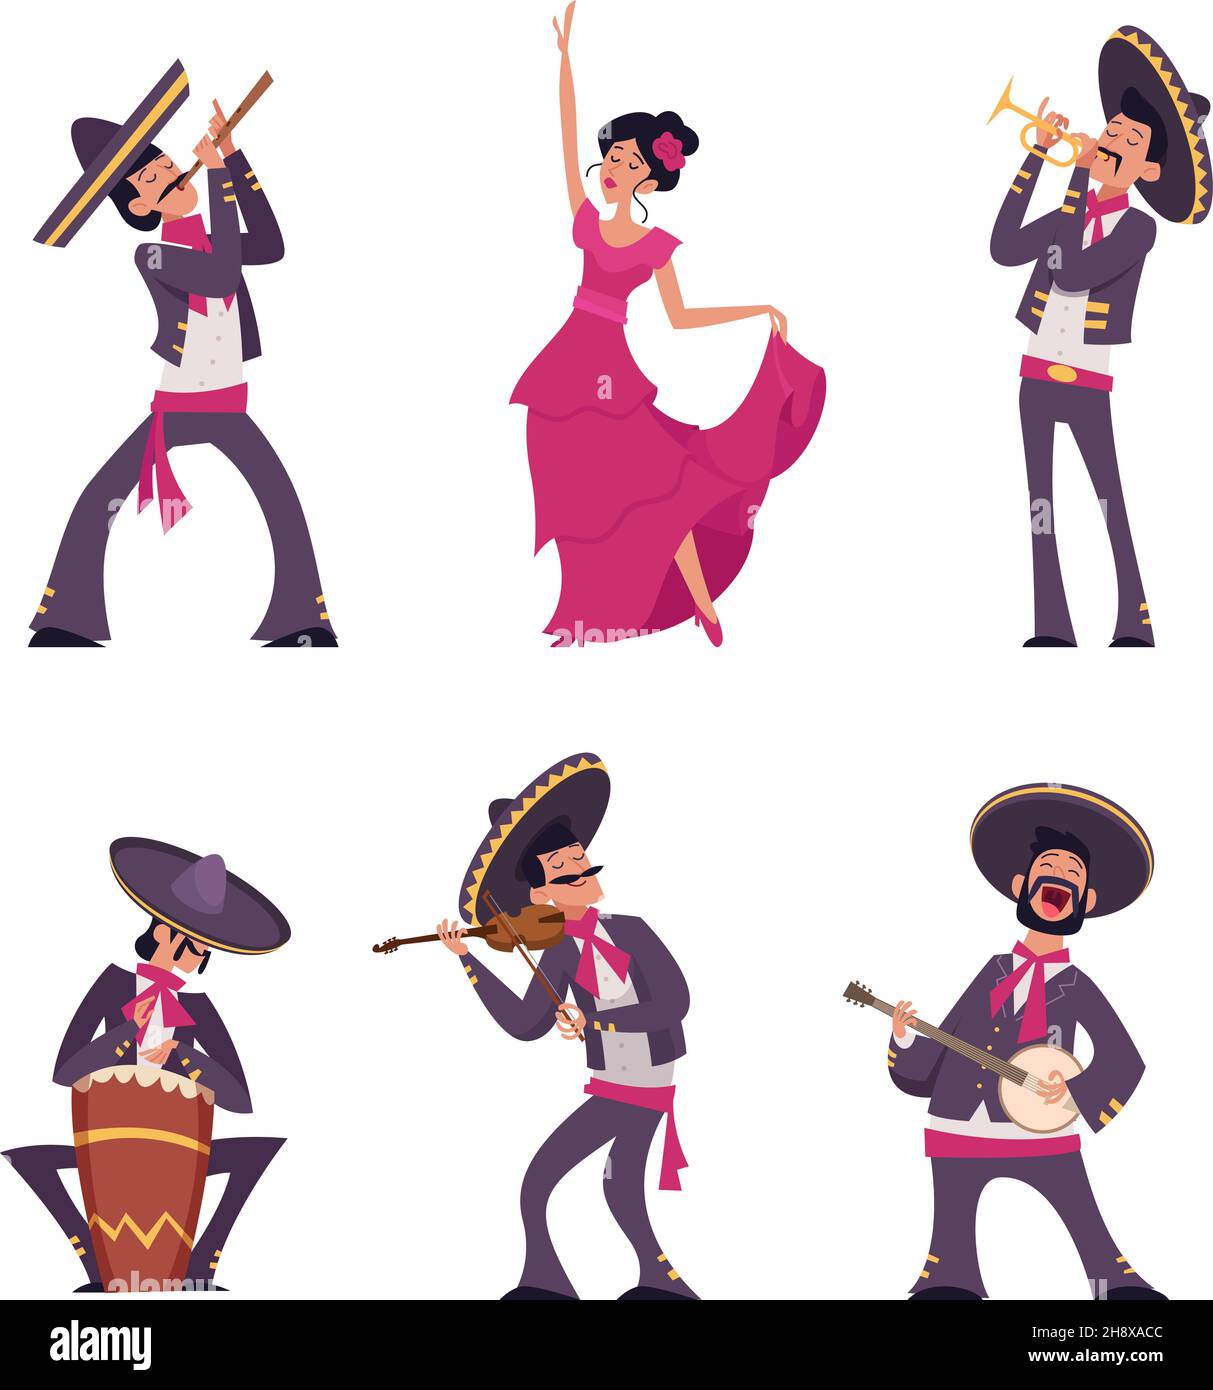 Spanish Traditional Clothes People Stock Vector - Illustration of